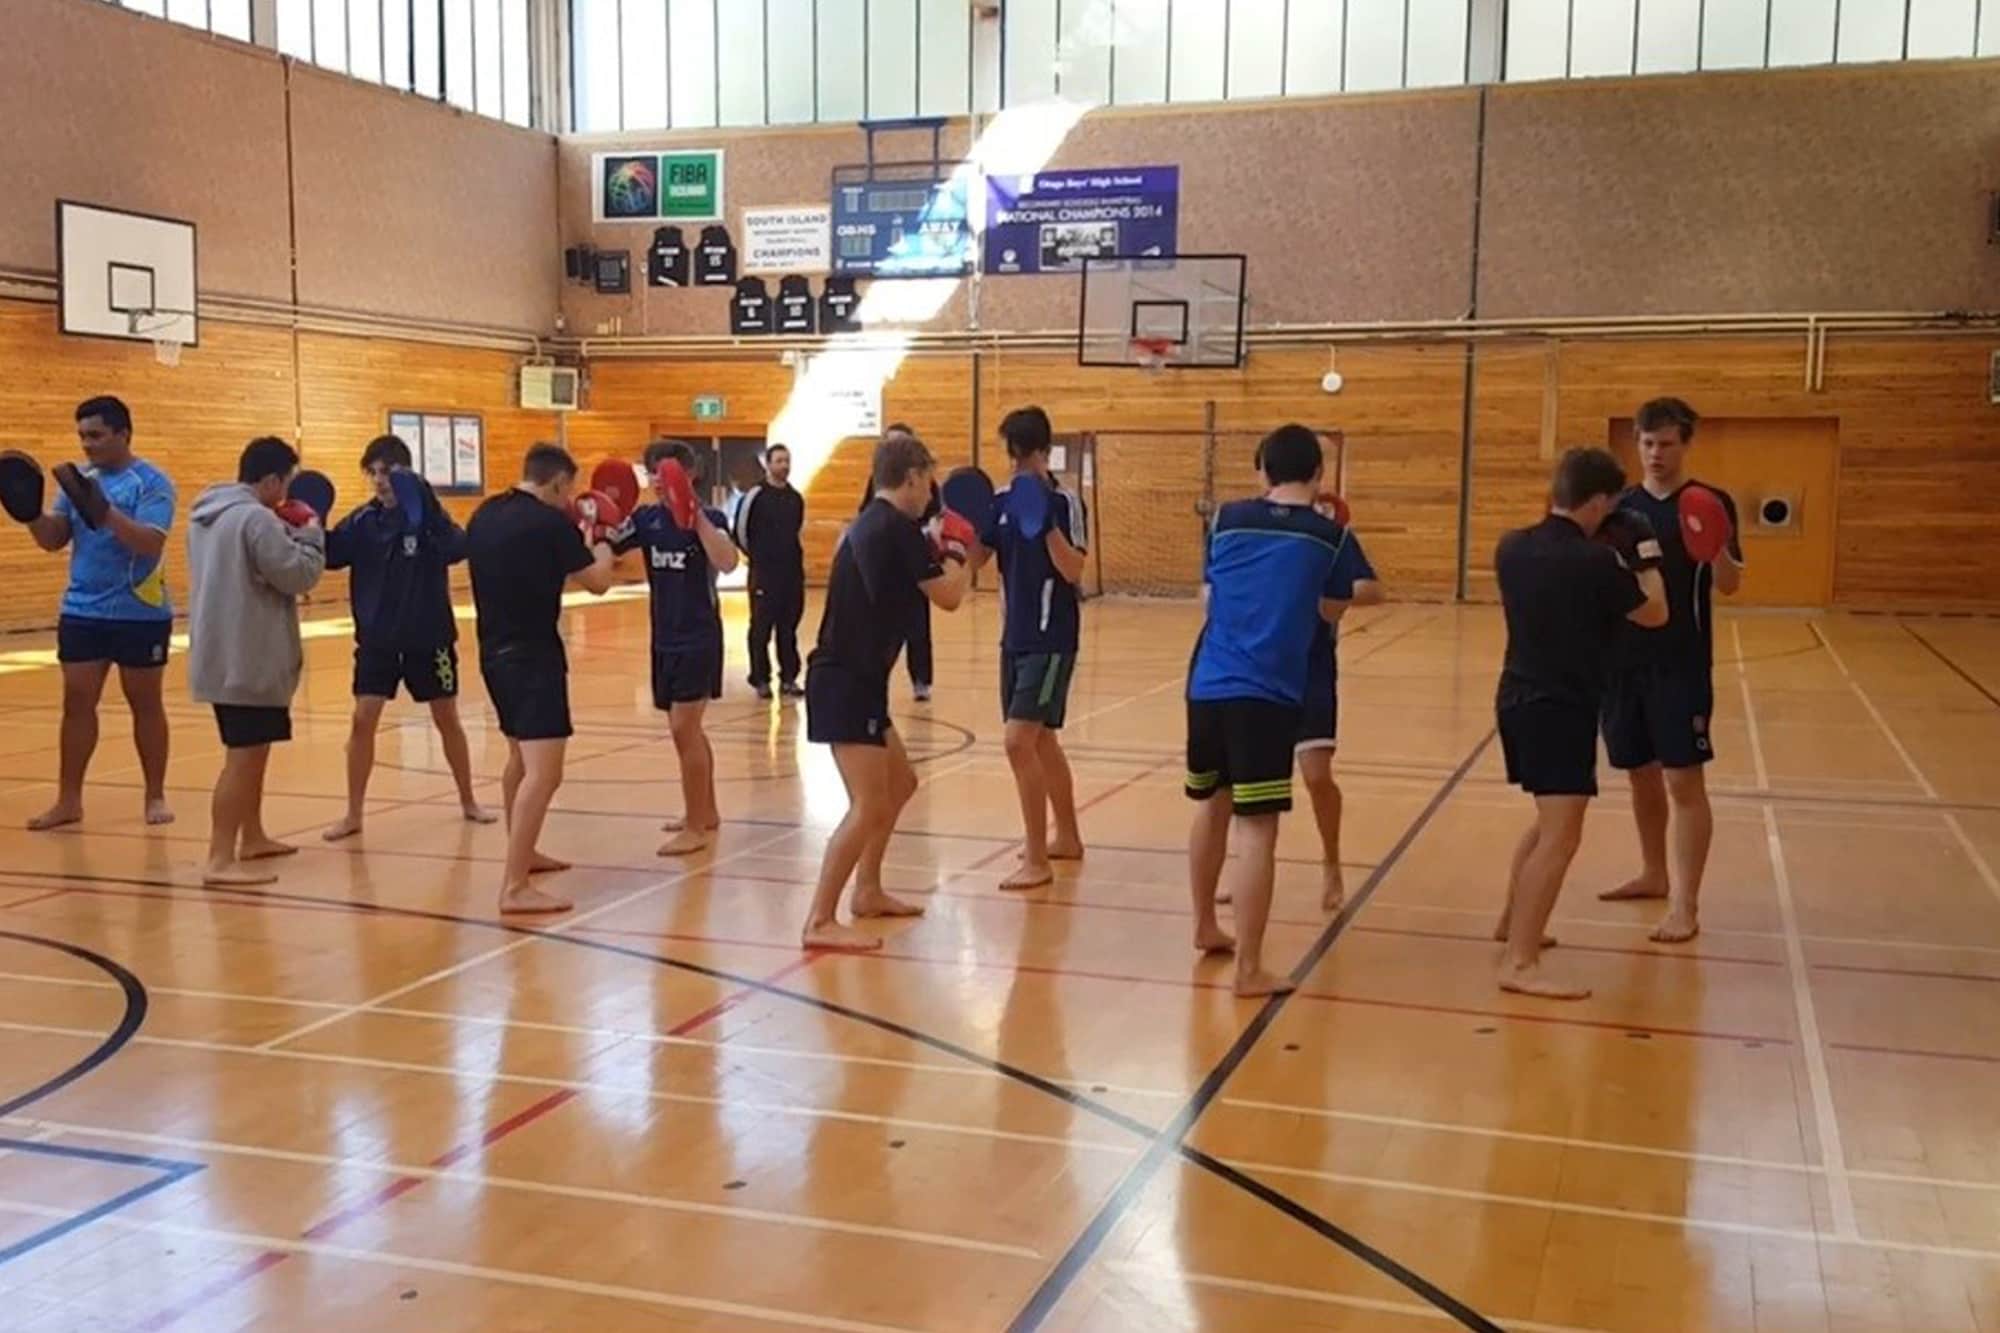 NZMMAF goes to school to showcase MMA’s physical and mental benefits